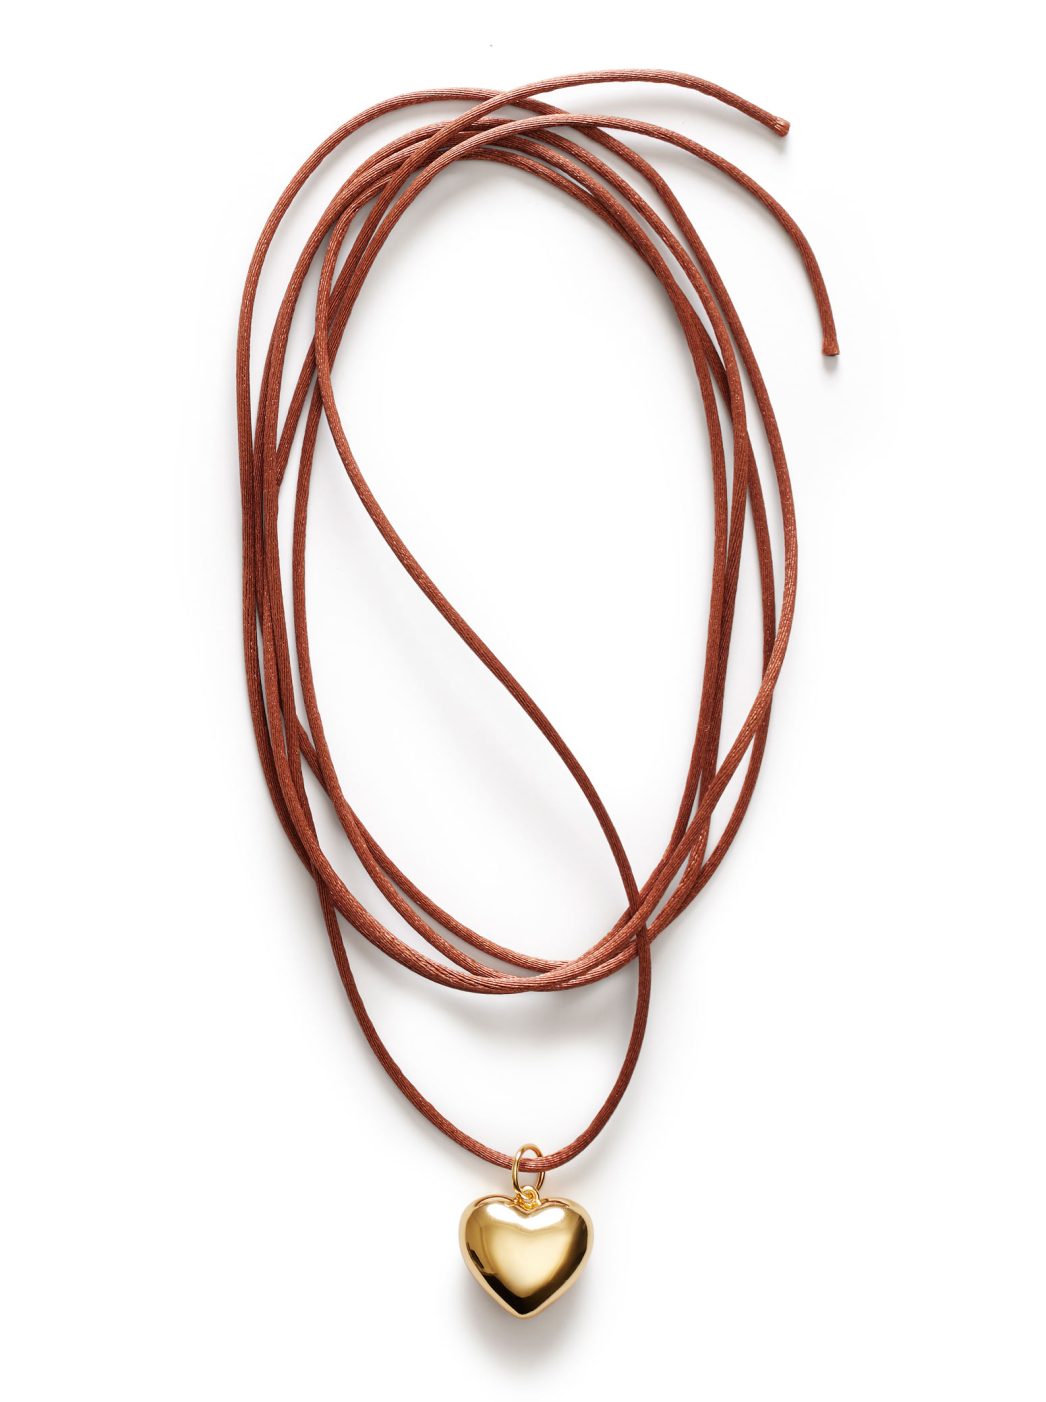 anni-lu-heart-on-a-string-necklace-gold